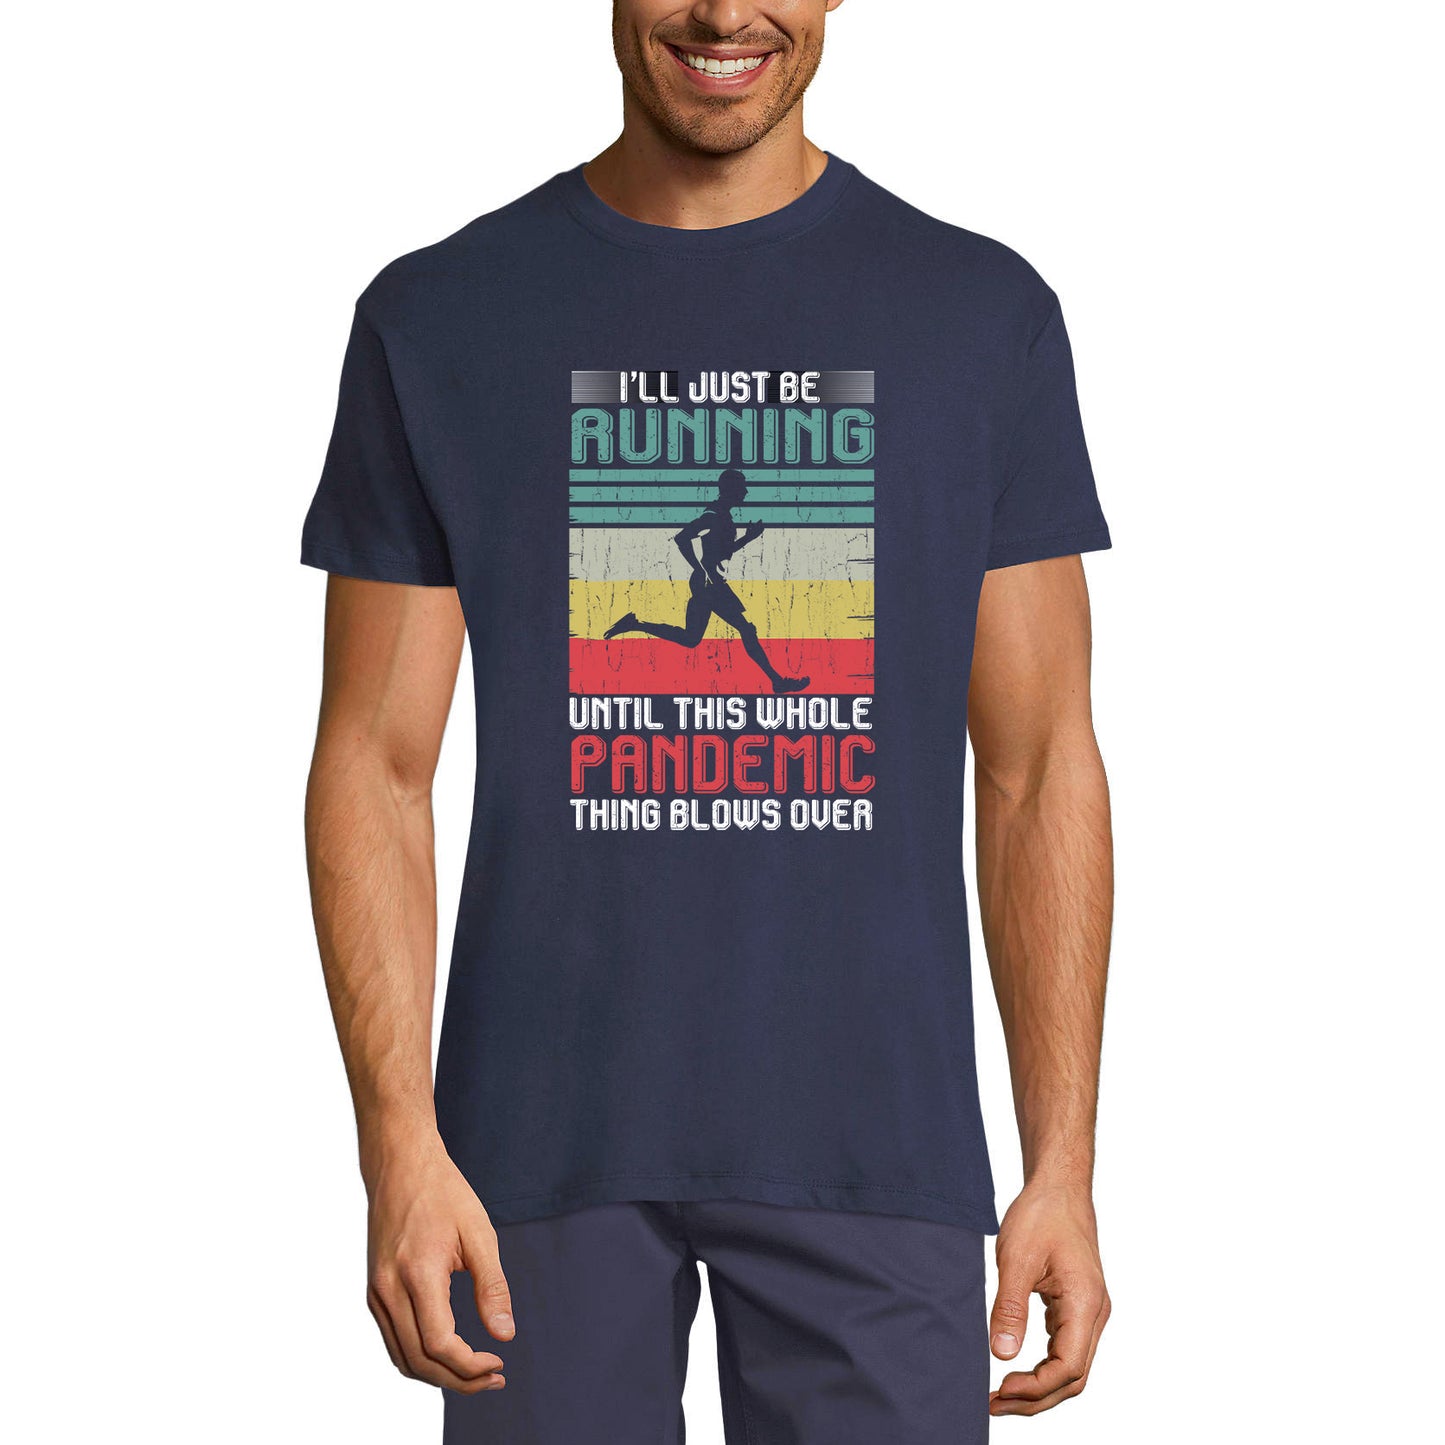 ULTRABASIC Men's T-Shirt I Will Just be Running Until This Whole Pandemic Thing Blows Over - Funny Runner Tee Shirt